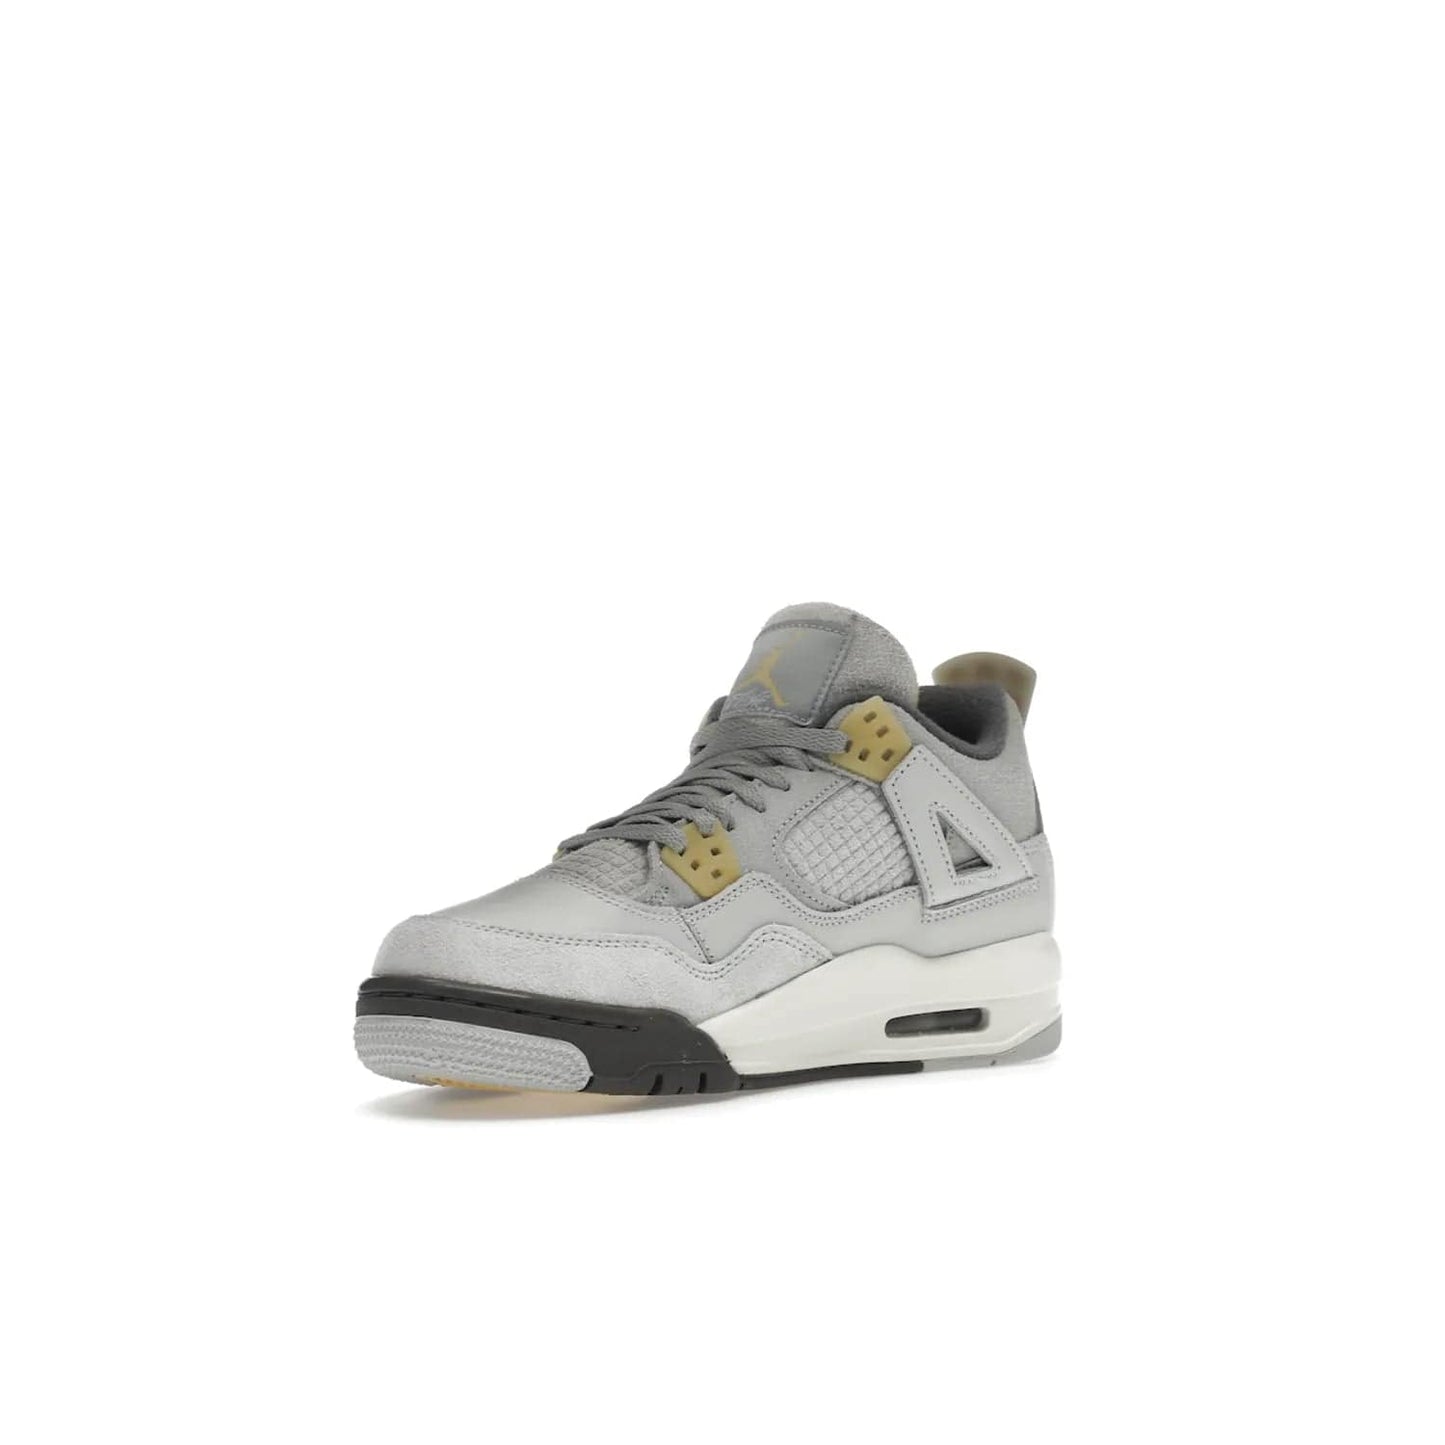 Jordan 4 Retro SE Craft Photon Dust (GS) - Image 15 - Only at www.BallersClubKickz.com - Shop the Jordan 4 Retro SE Craft Photon Dust (GS), the ultimate mix of style and comfort. With photonic dust, pale vanilla, off-white, grey fog, flat pewter and sail colorway, foam midsole, and rubber outsole, don't miss this special edition Jordan 4 releasing Feb 11, 2023.